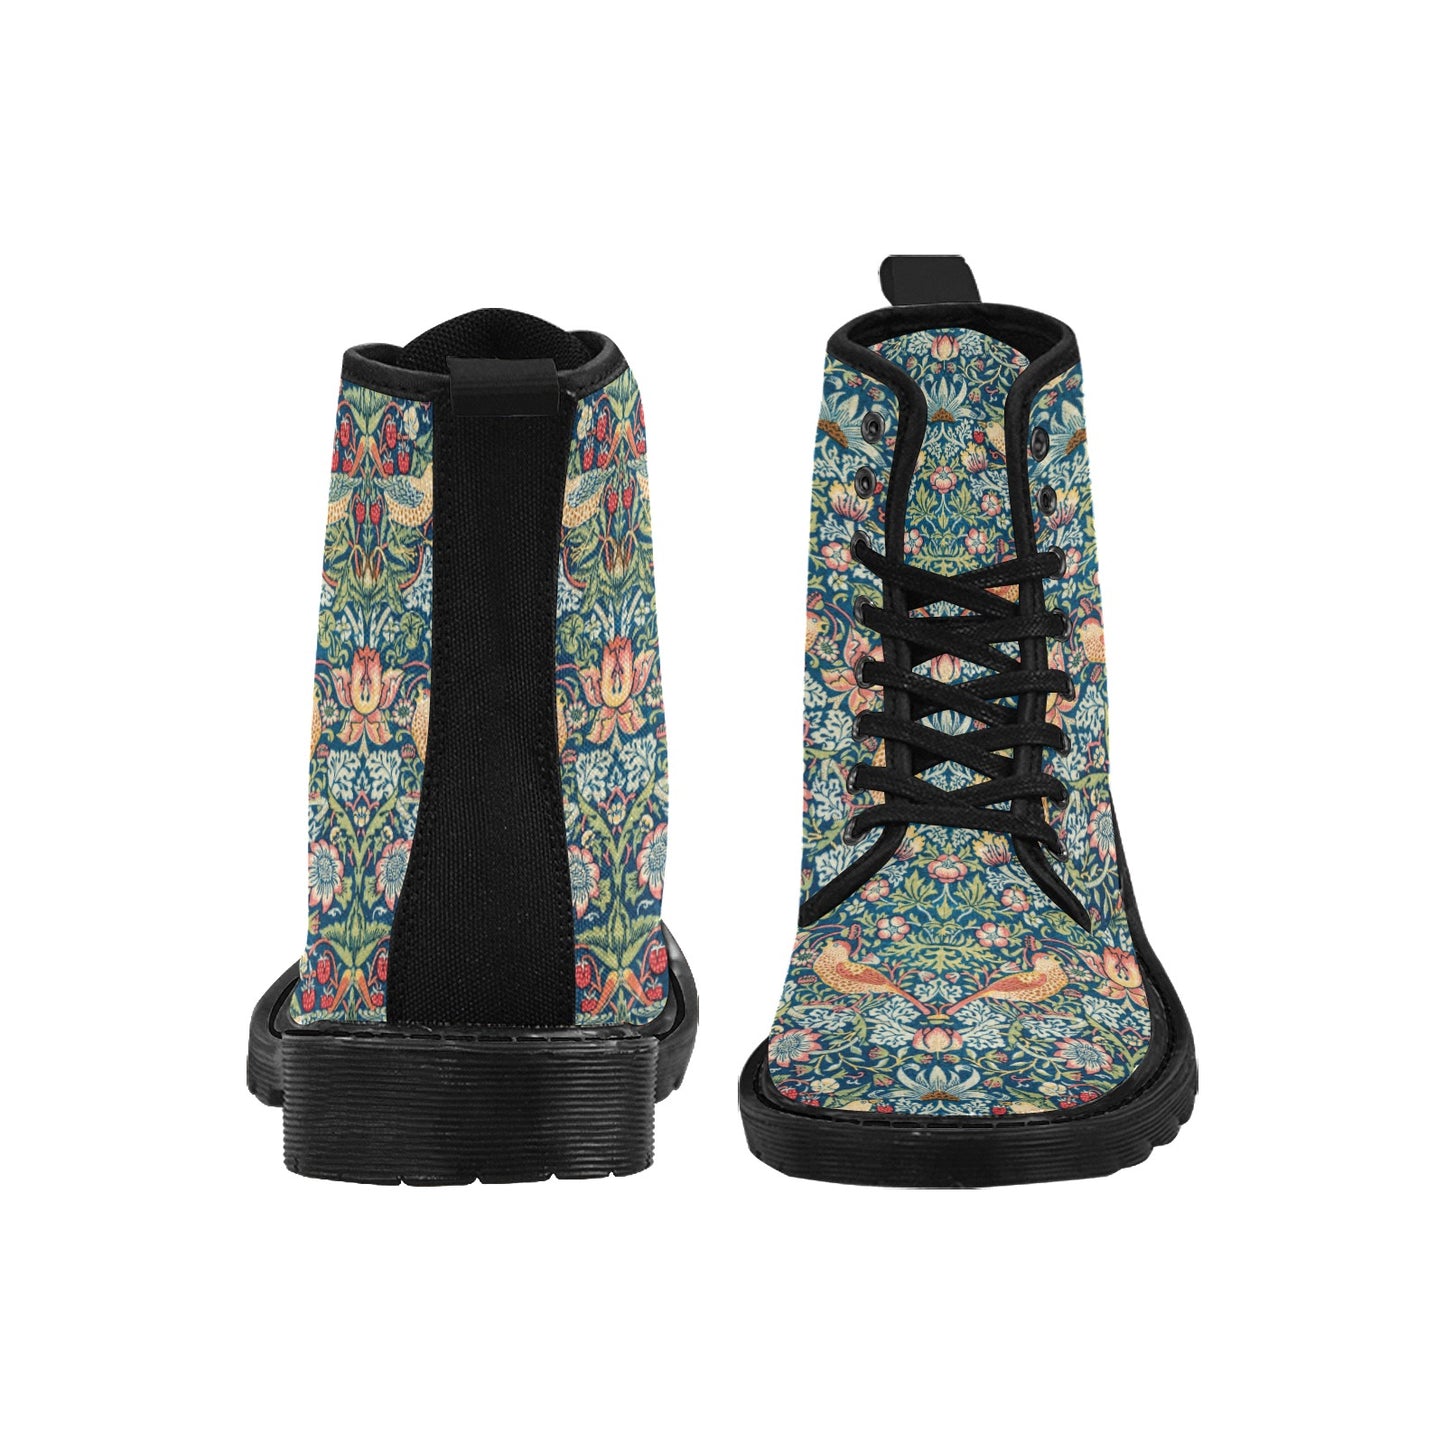 Men’s Flowered Canvas Boots with Strawberry Thief William Morris Wallpaper Design